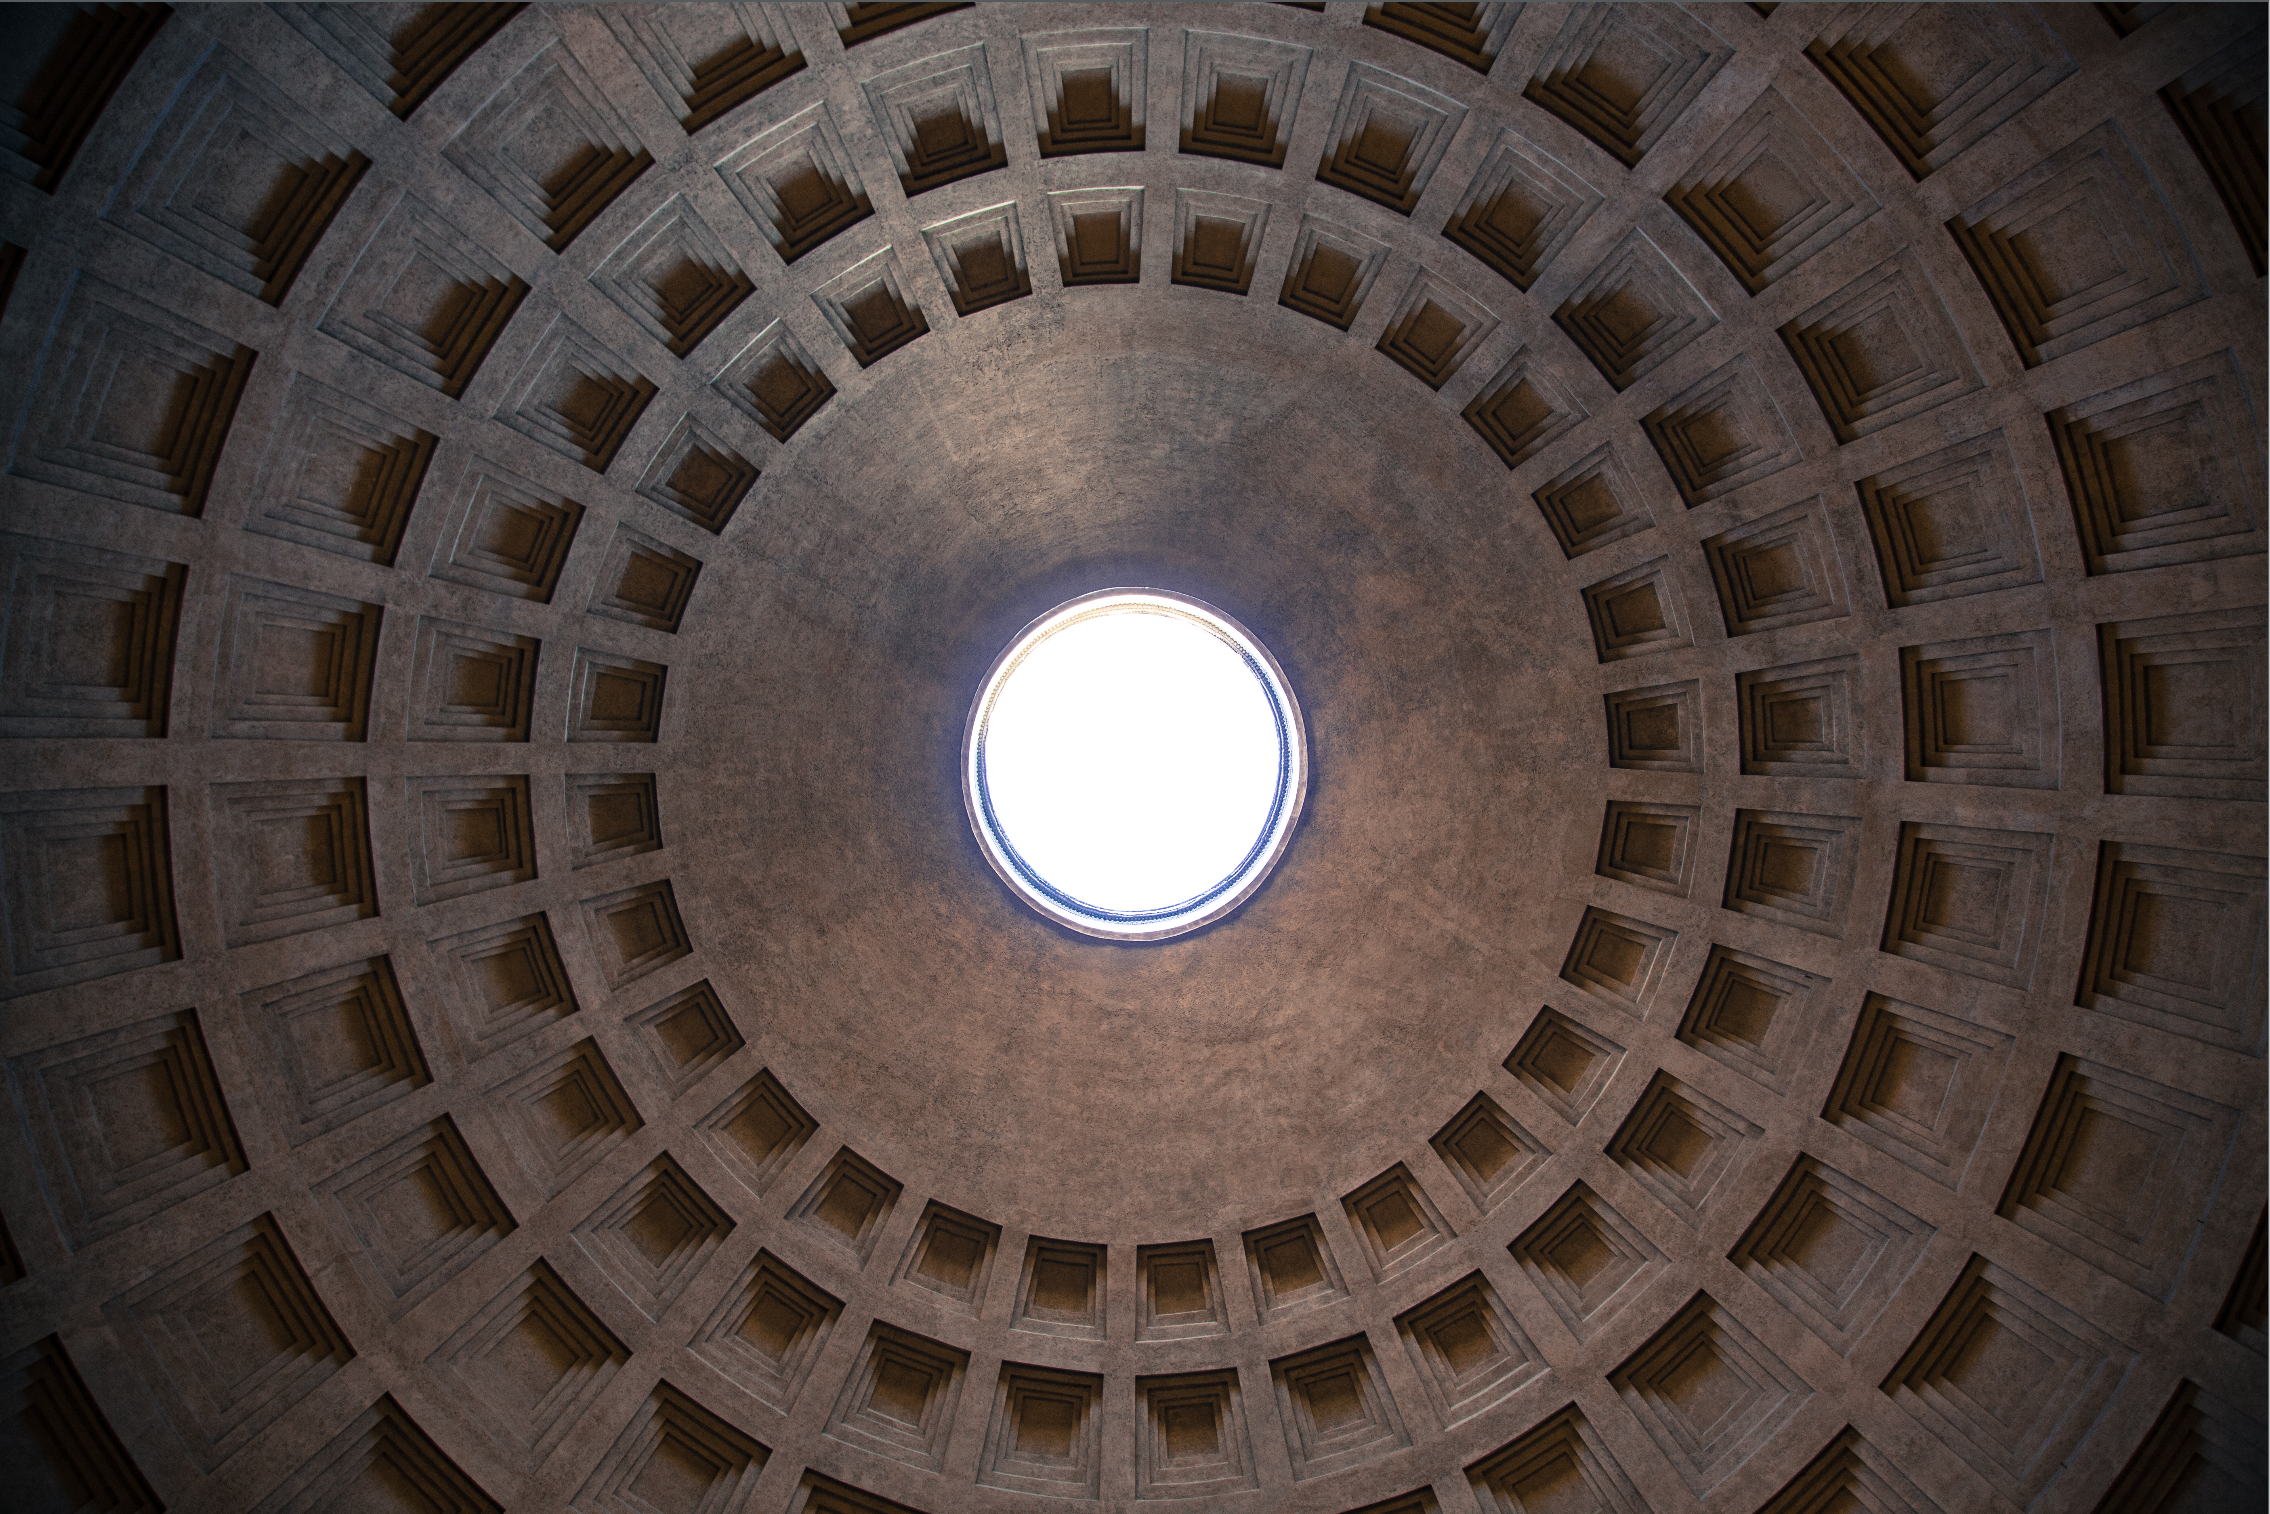 The Pantheon, commissioned by Agrippa and then finished by Hadrian (120s AD), still stands today with a ~4500 ton Concrete dome held by eight barrel vaults resulting in the largest free standing unreinforced dome in the world.